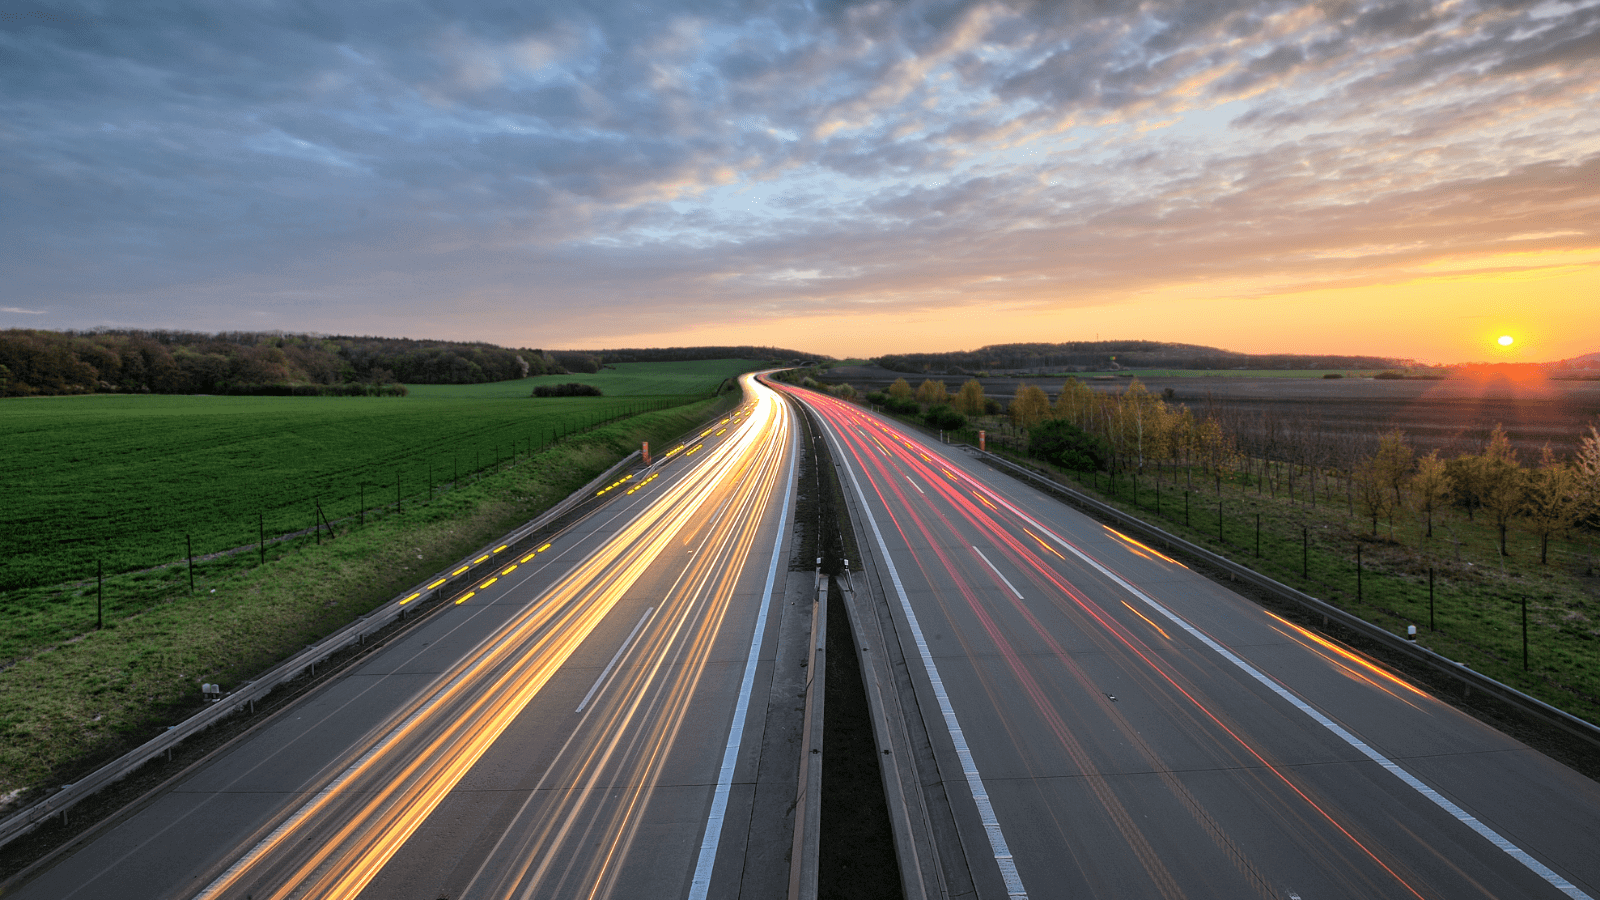 Connecting to New Growth Opportunities: The Gorakhpur Link Expressway